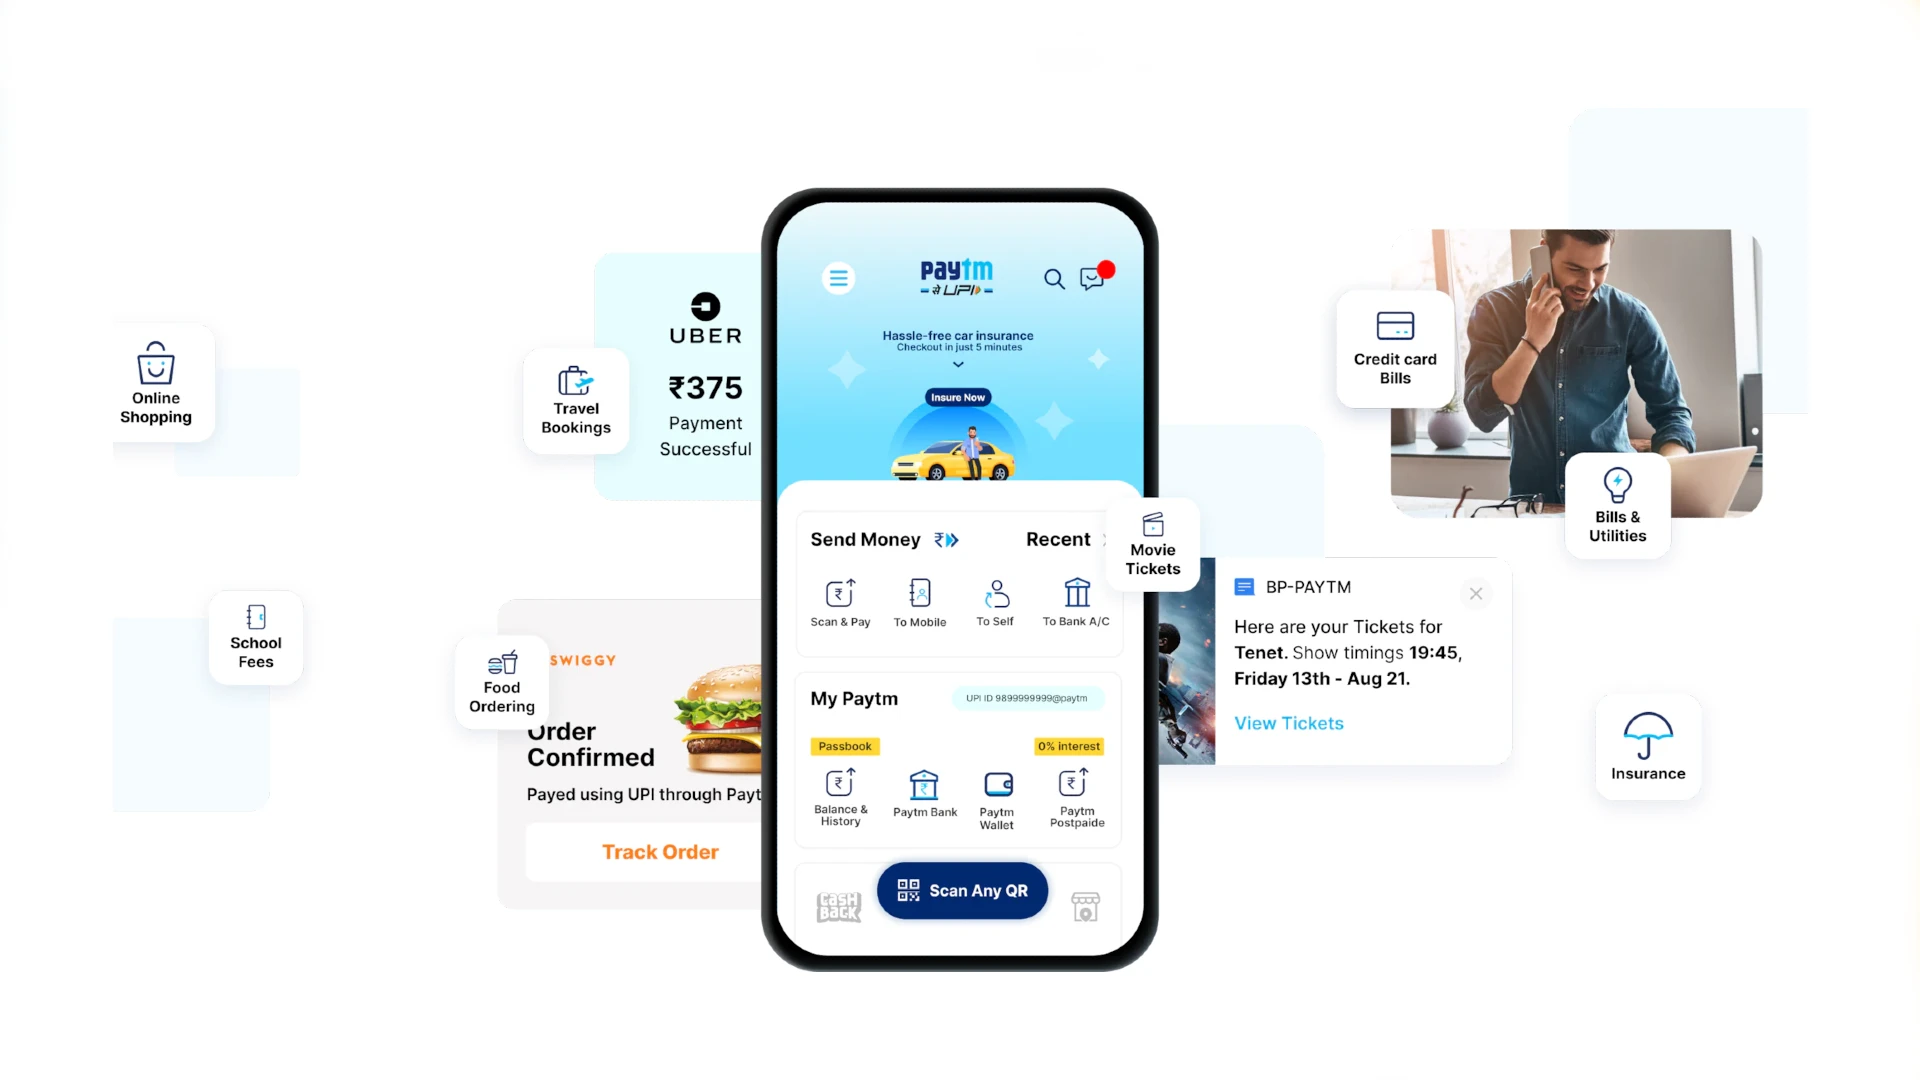 No more missed payments with Paytm’s best-in-class reminders